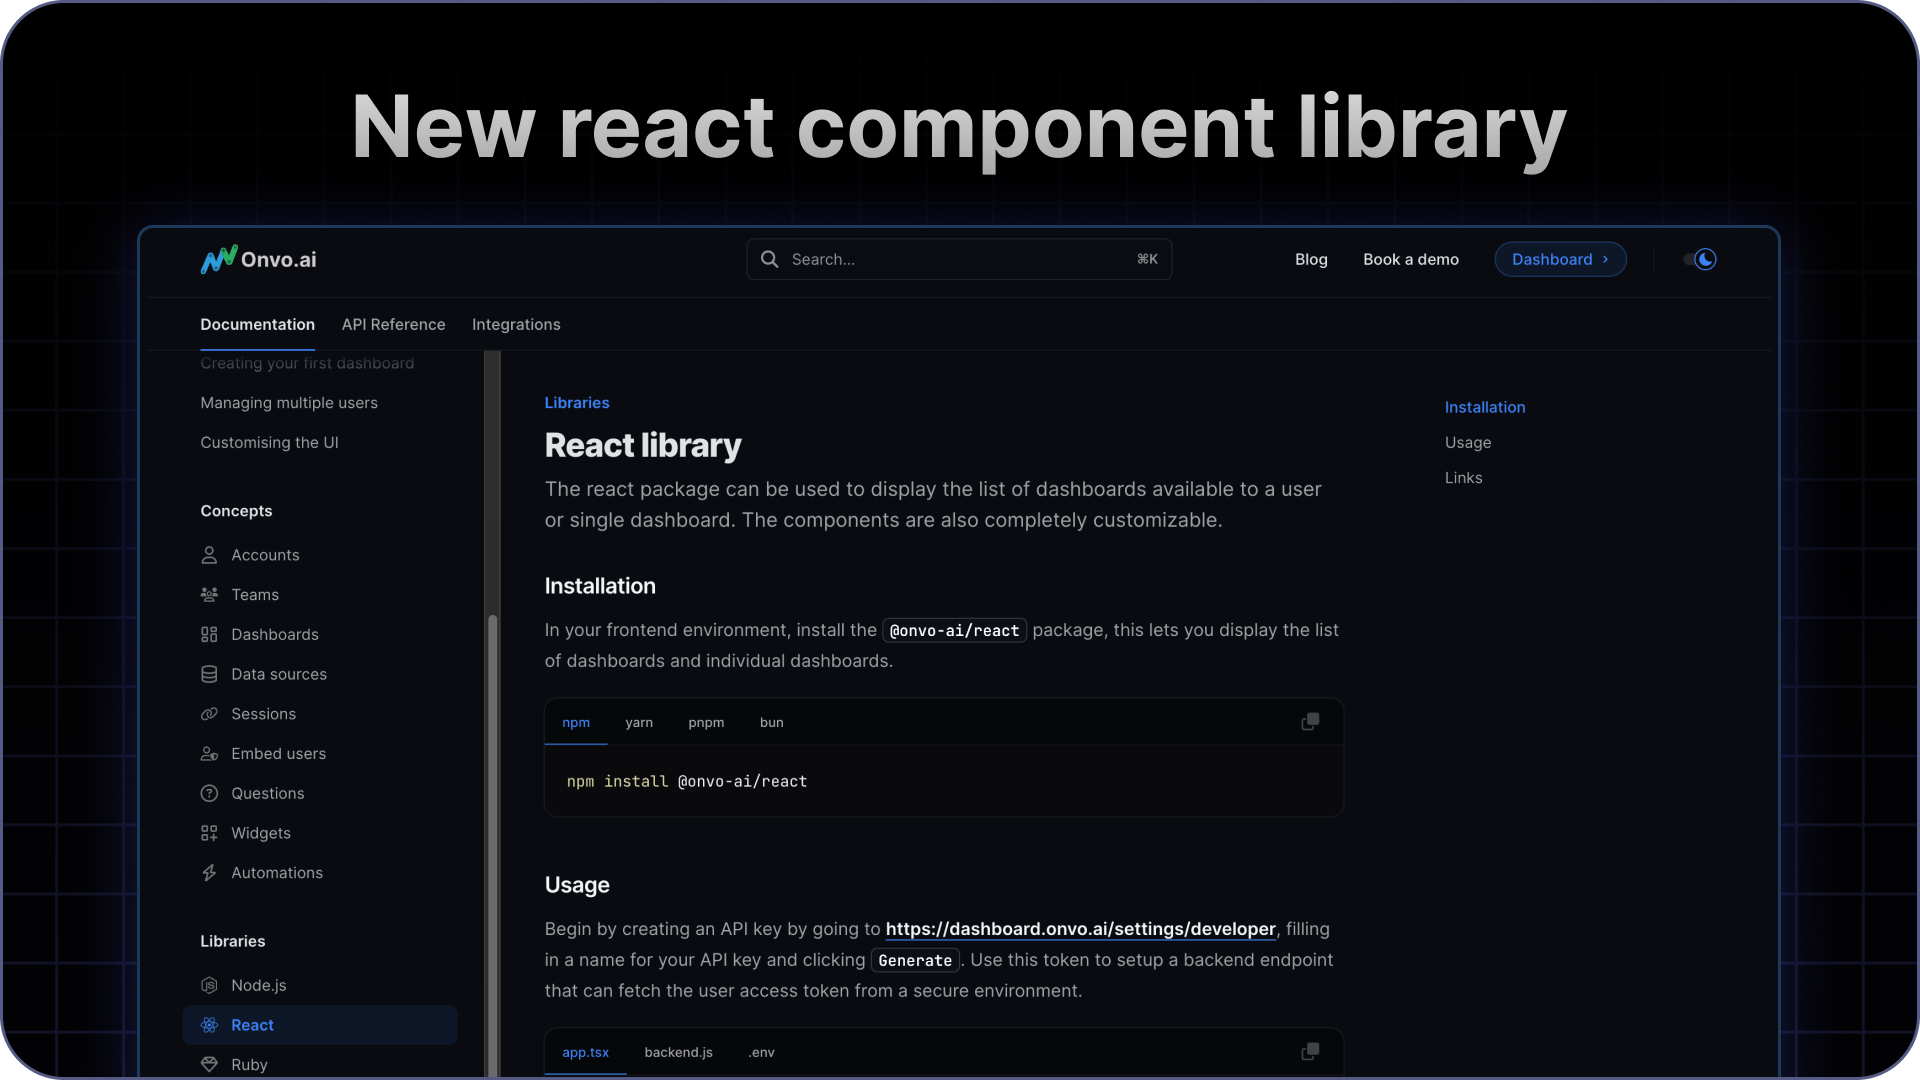 Launch update: Updated documentation and libraries